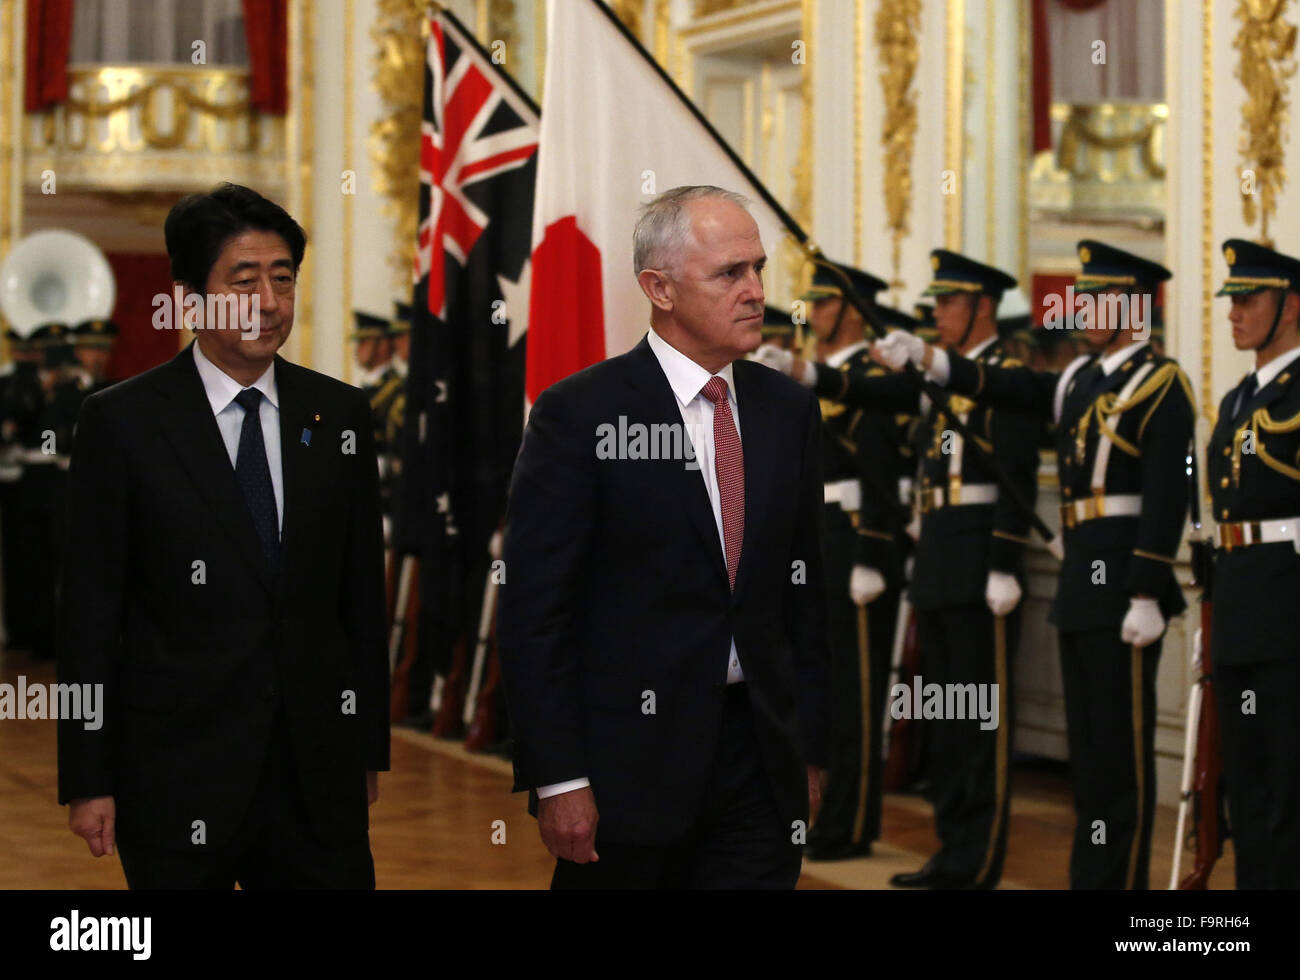 Tokyo. 18th Dec, 2015. Japan's Prime Minister Shinzo Abe and his Australian counterpart Malcolm Turnbull review an honor guard ahead of their meeting at Akasaka hotel in Tokyo, Japan, Dec. 18, 2015. © Xinhua/Alamy Live News Stock Photo